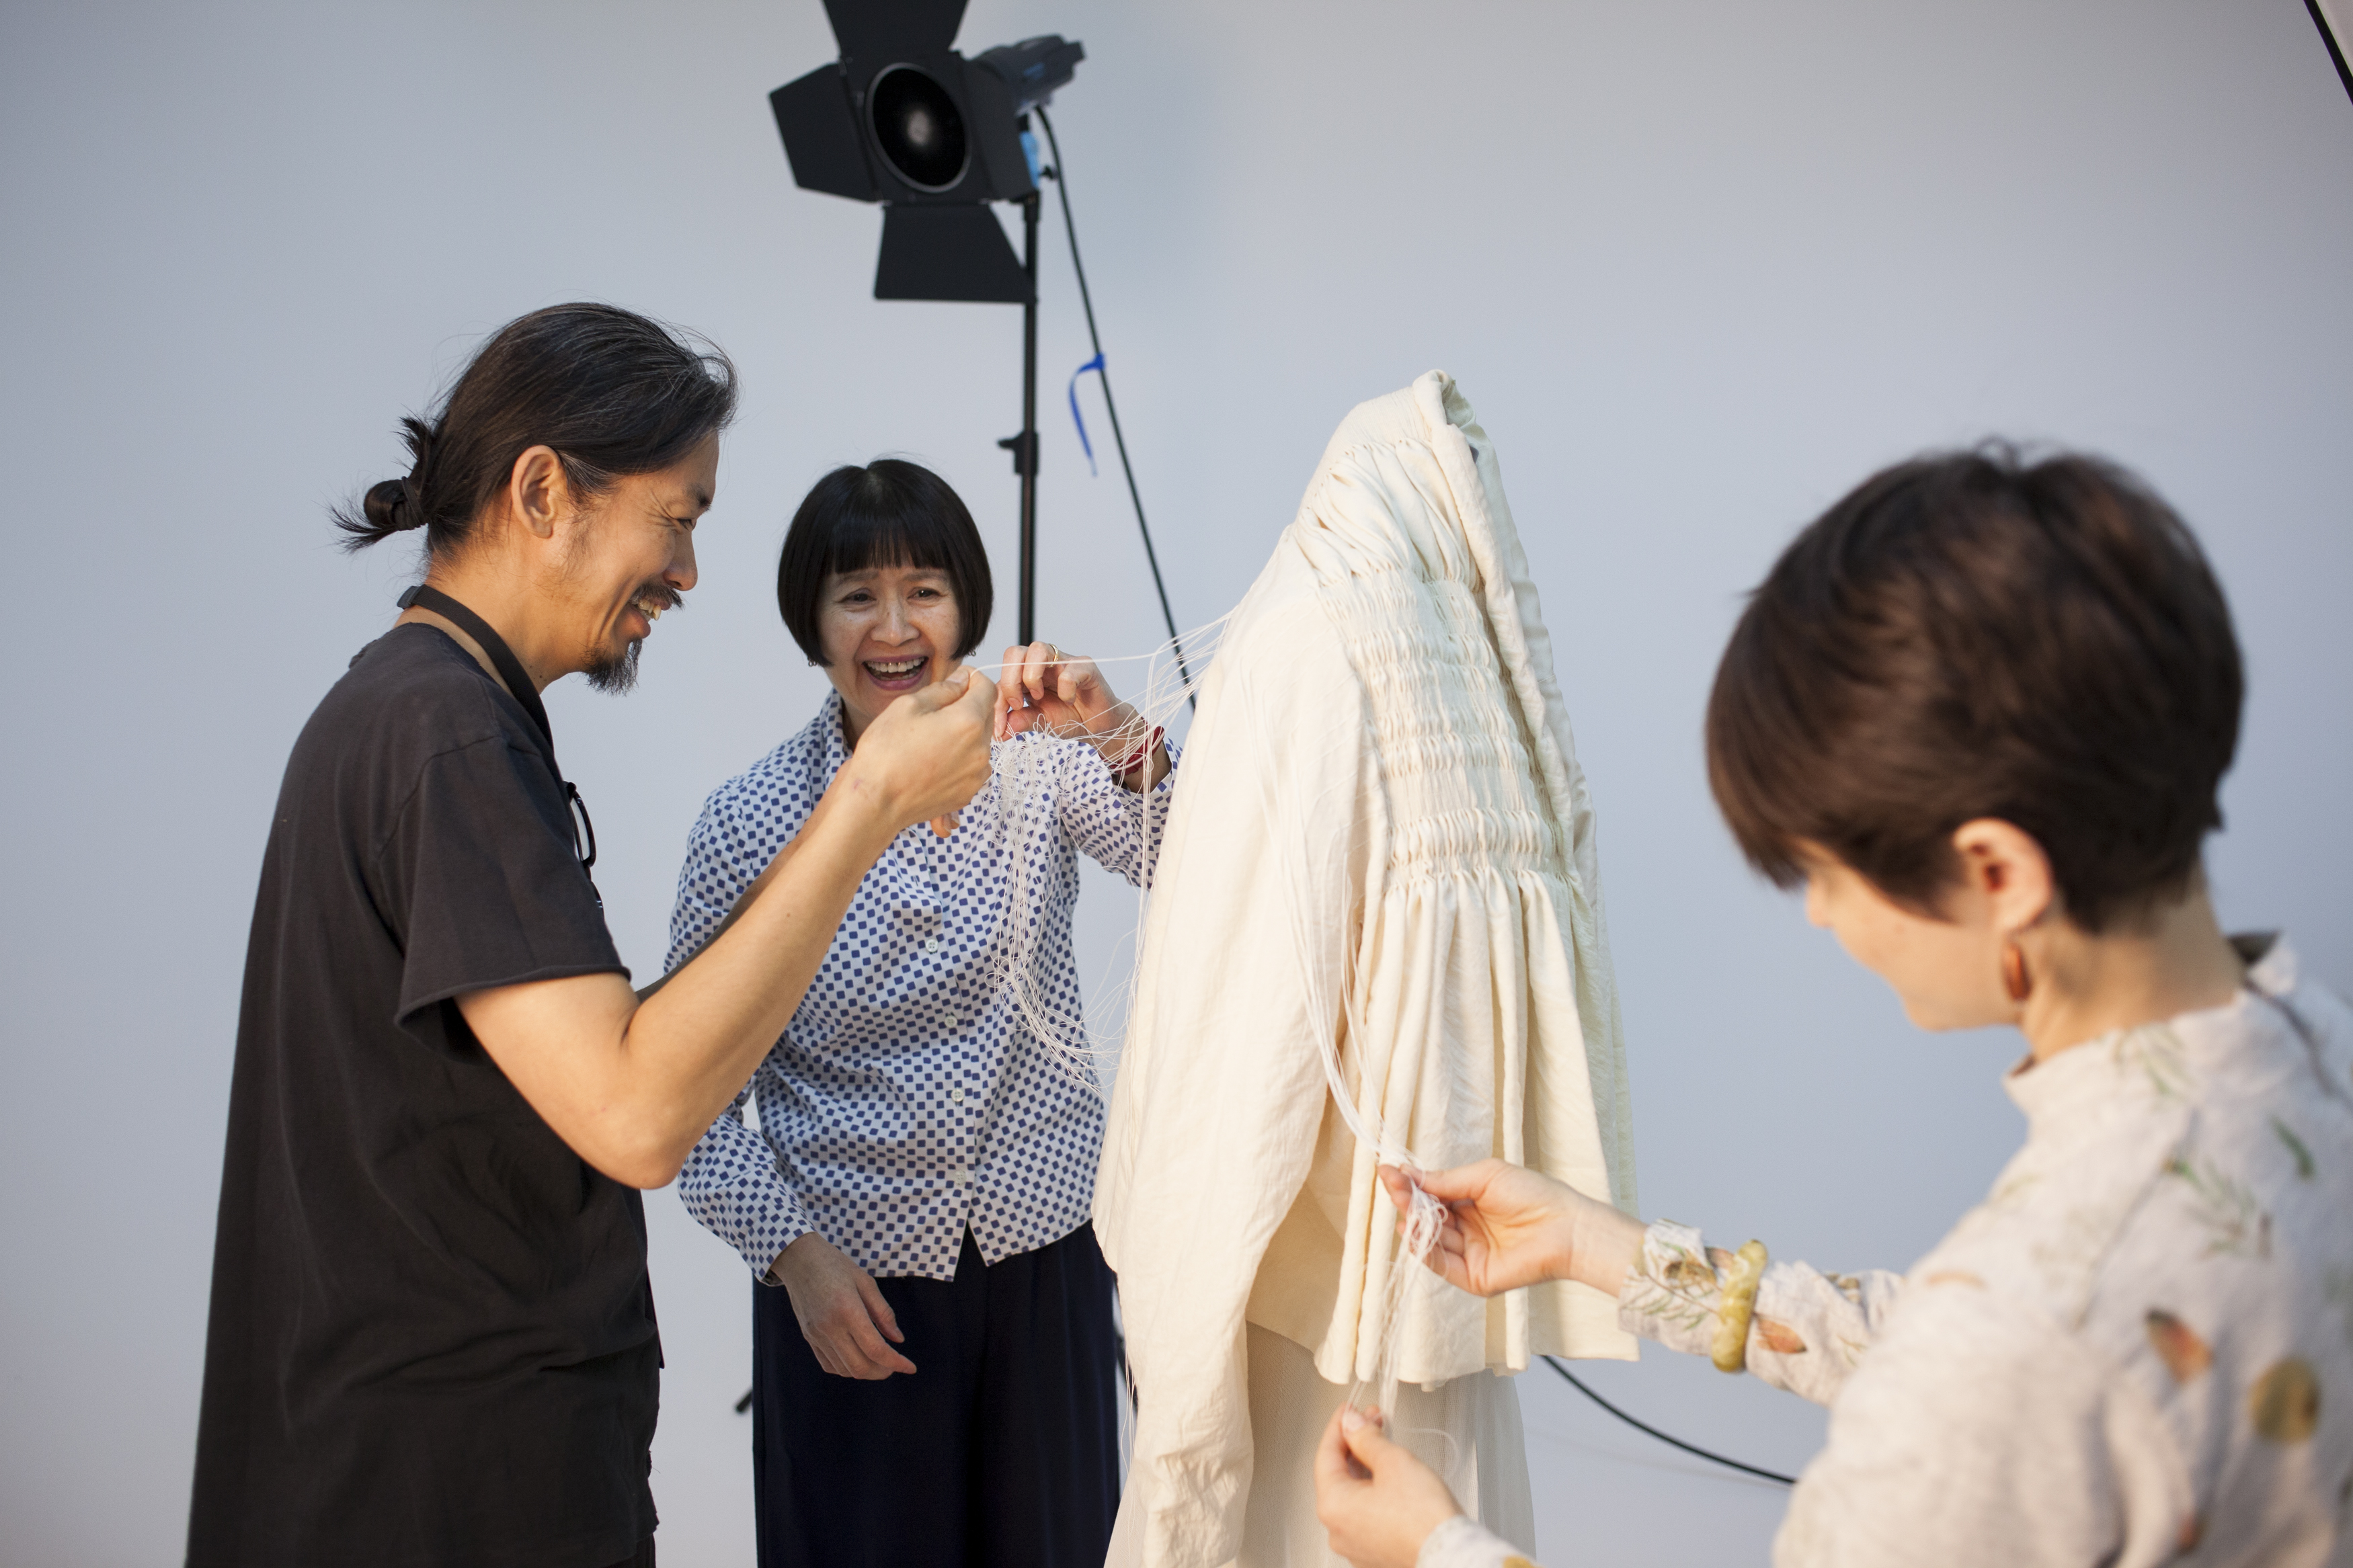 A man and a woman untangling long, linen threads on the back of a woollen jacket while another woman untangles threads on the front of the jacket. There is a stand with camera equipment mounted on it in the background.